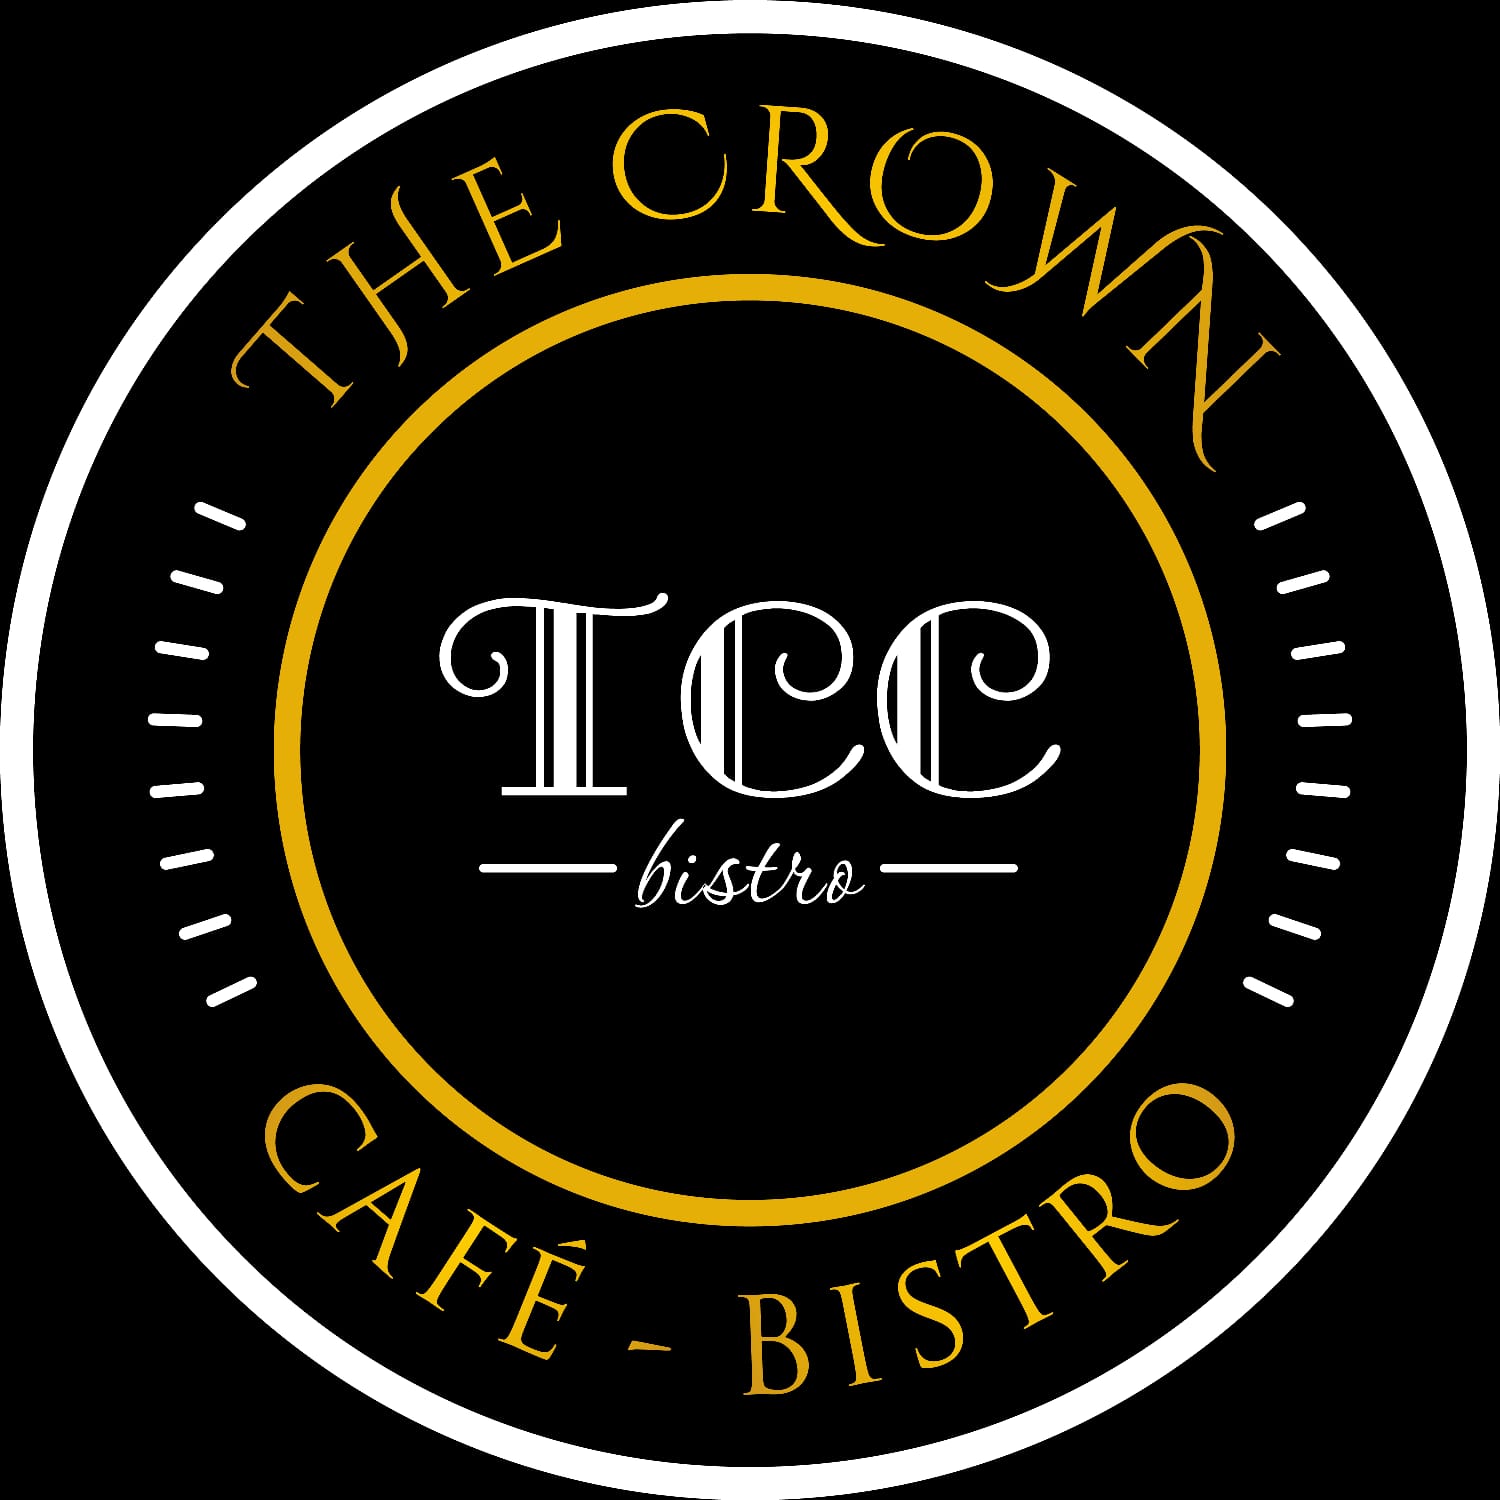 The Crown Cafe